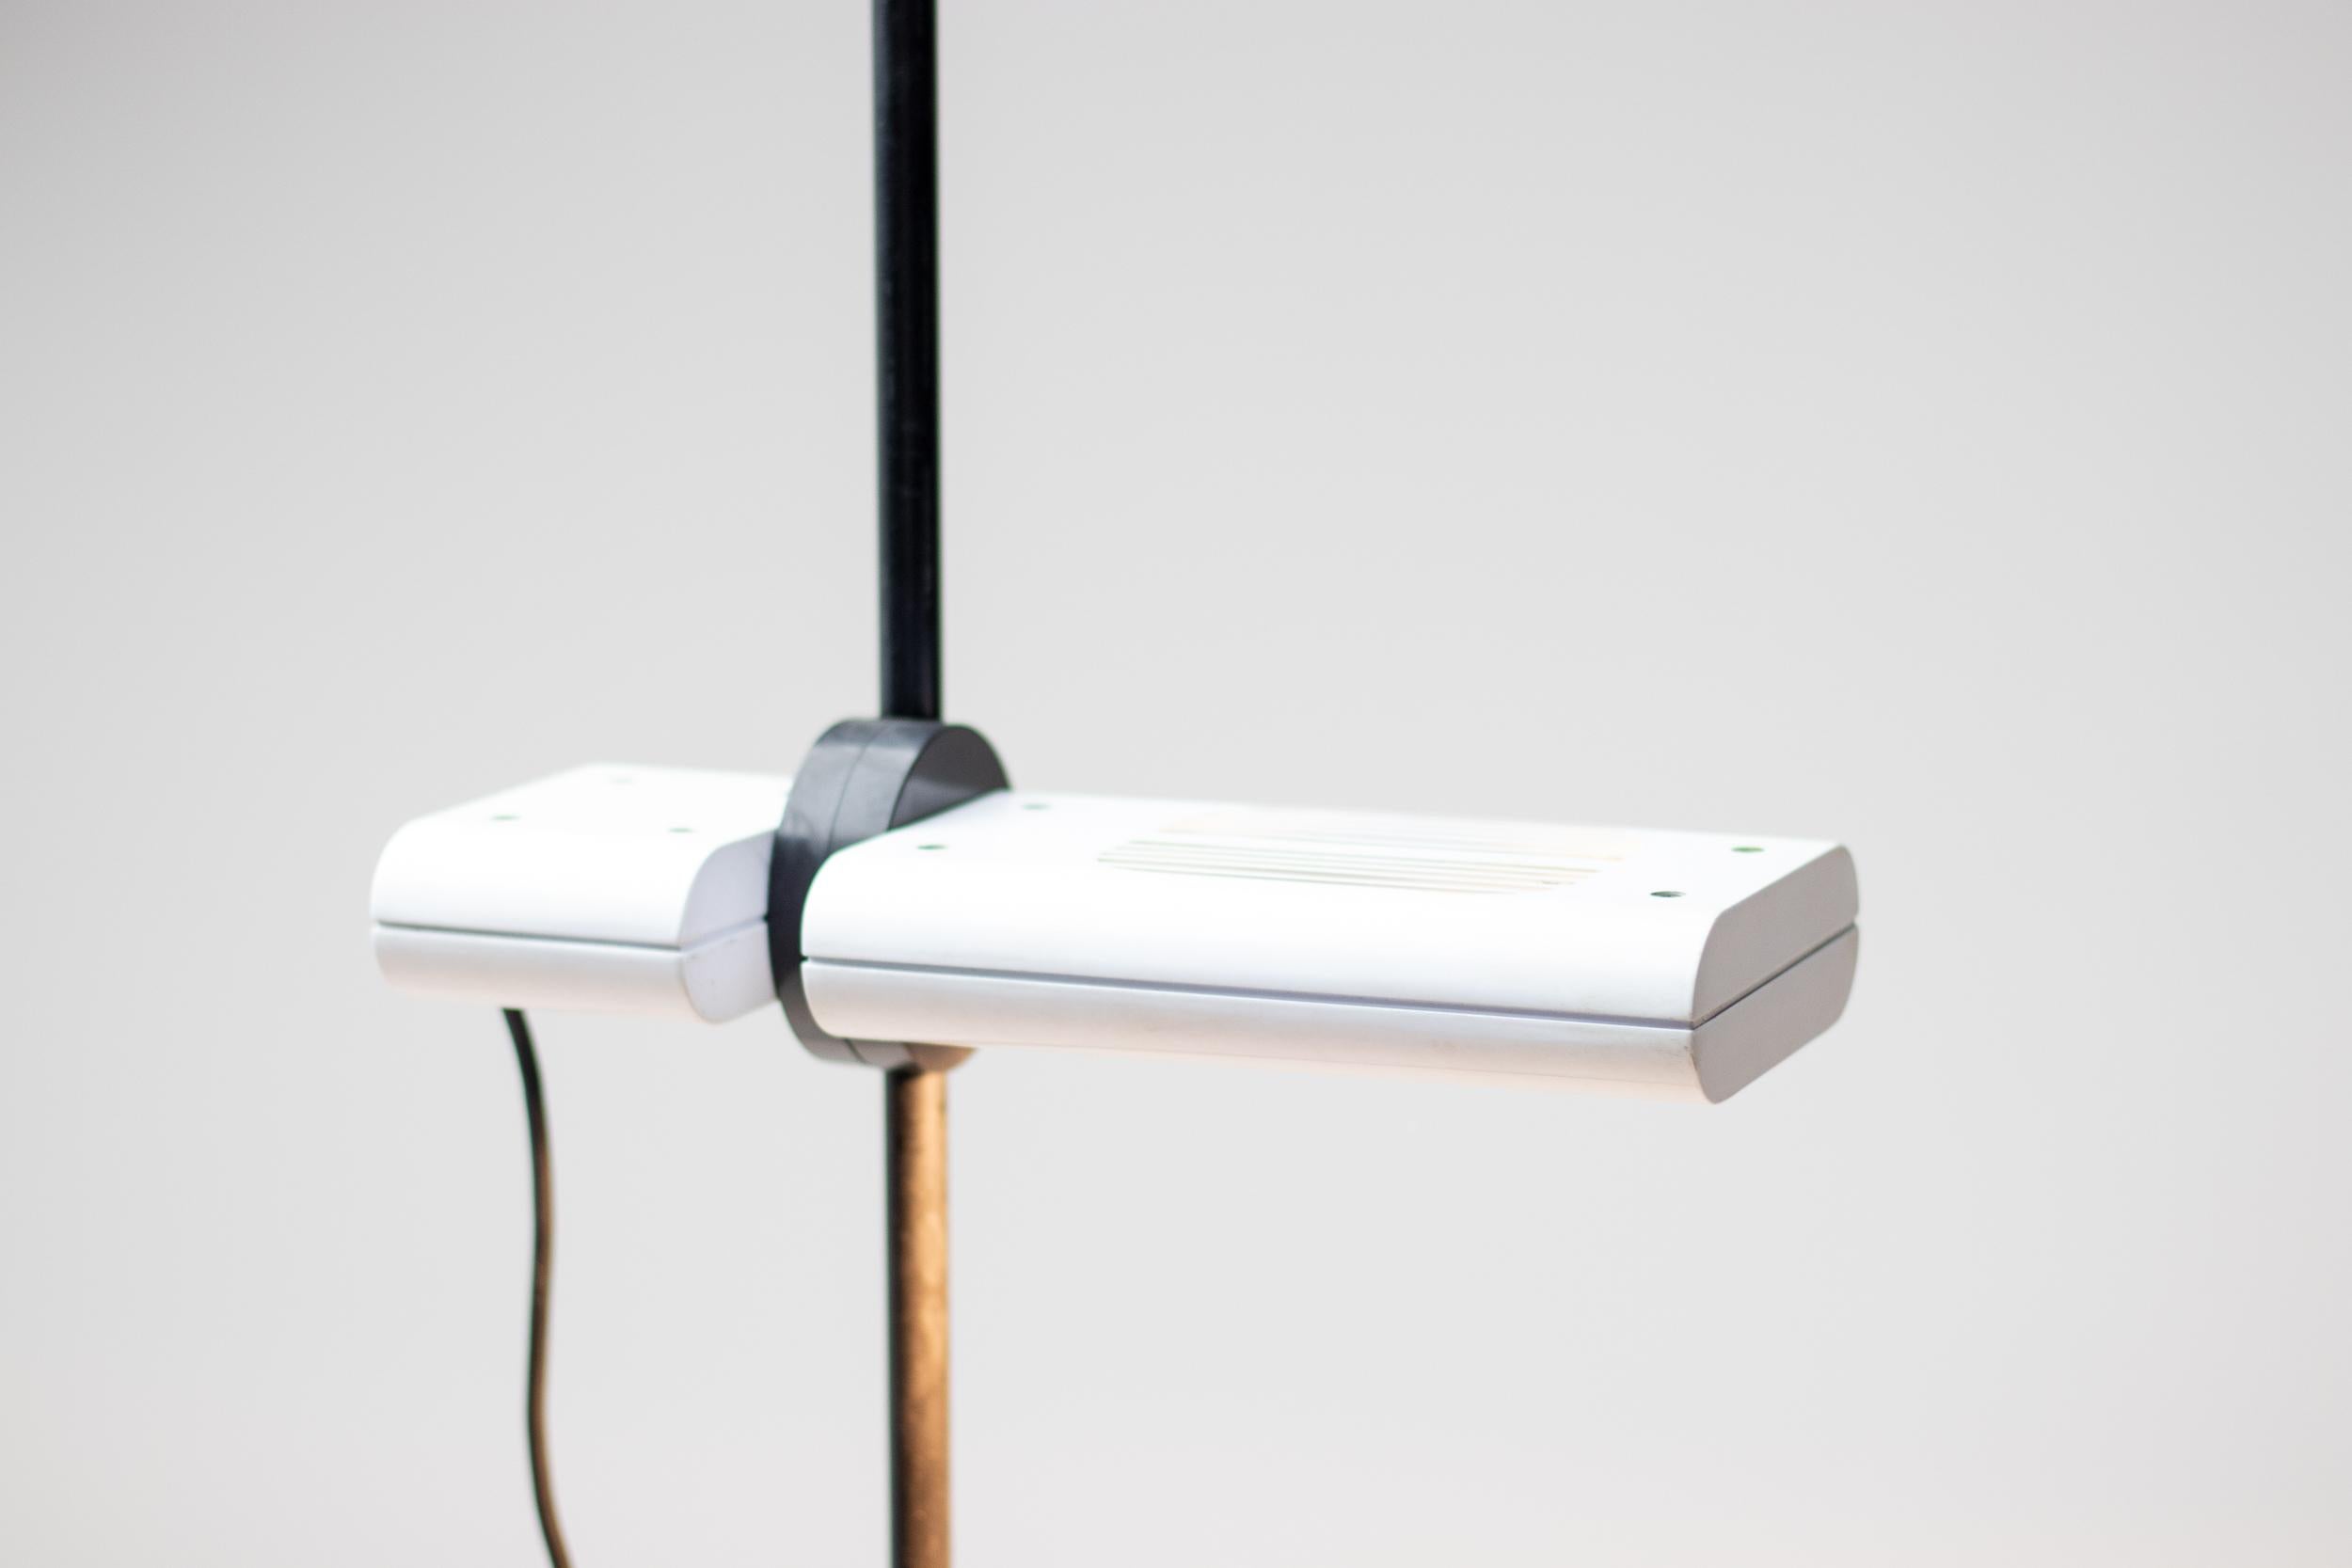 Minimalist Aton Terra halogen floor lamp designed by Ernesto Gismondi for Artemide, Italy. Marked underneath the base. Currently out of production. Features a height adjustable shade that can be used as an uplighter or downlighter.  Excellent